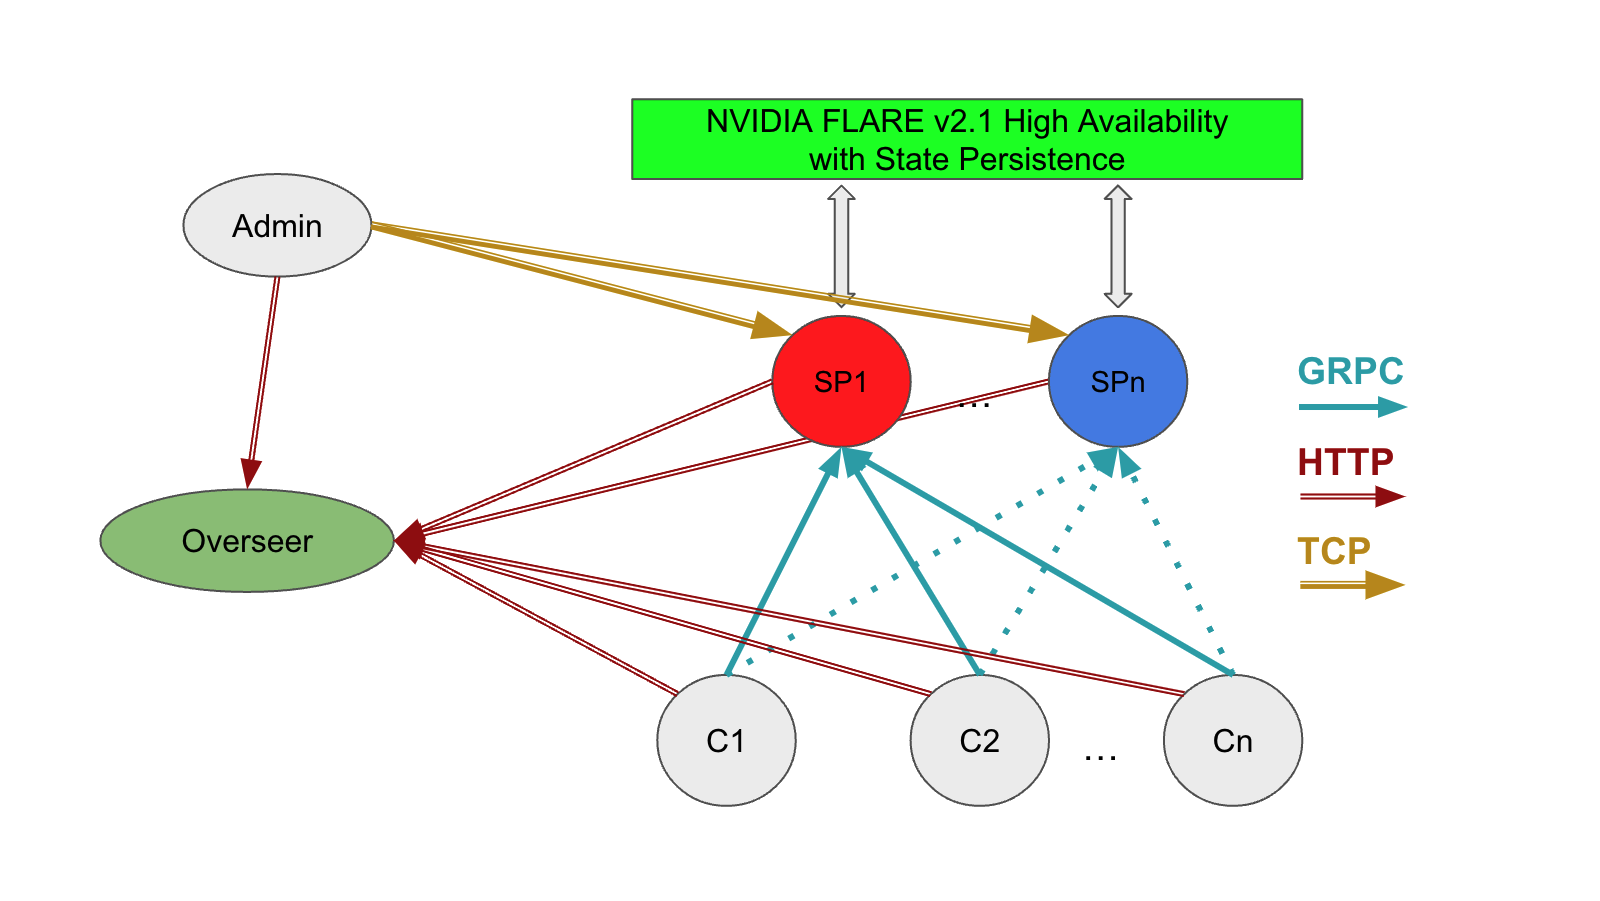 Diagram shows flow from NVIDIA FLARE to service providers and clients, with input/output from admin and overseer, to output as GRPC, HTTP, and TCP.